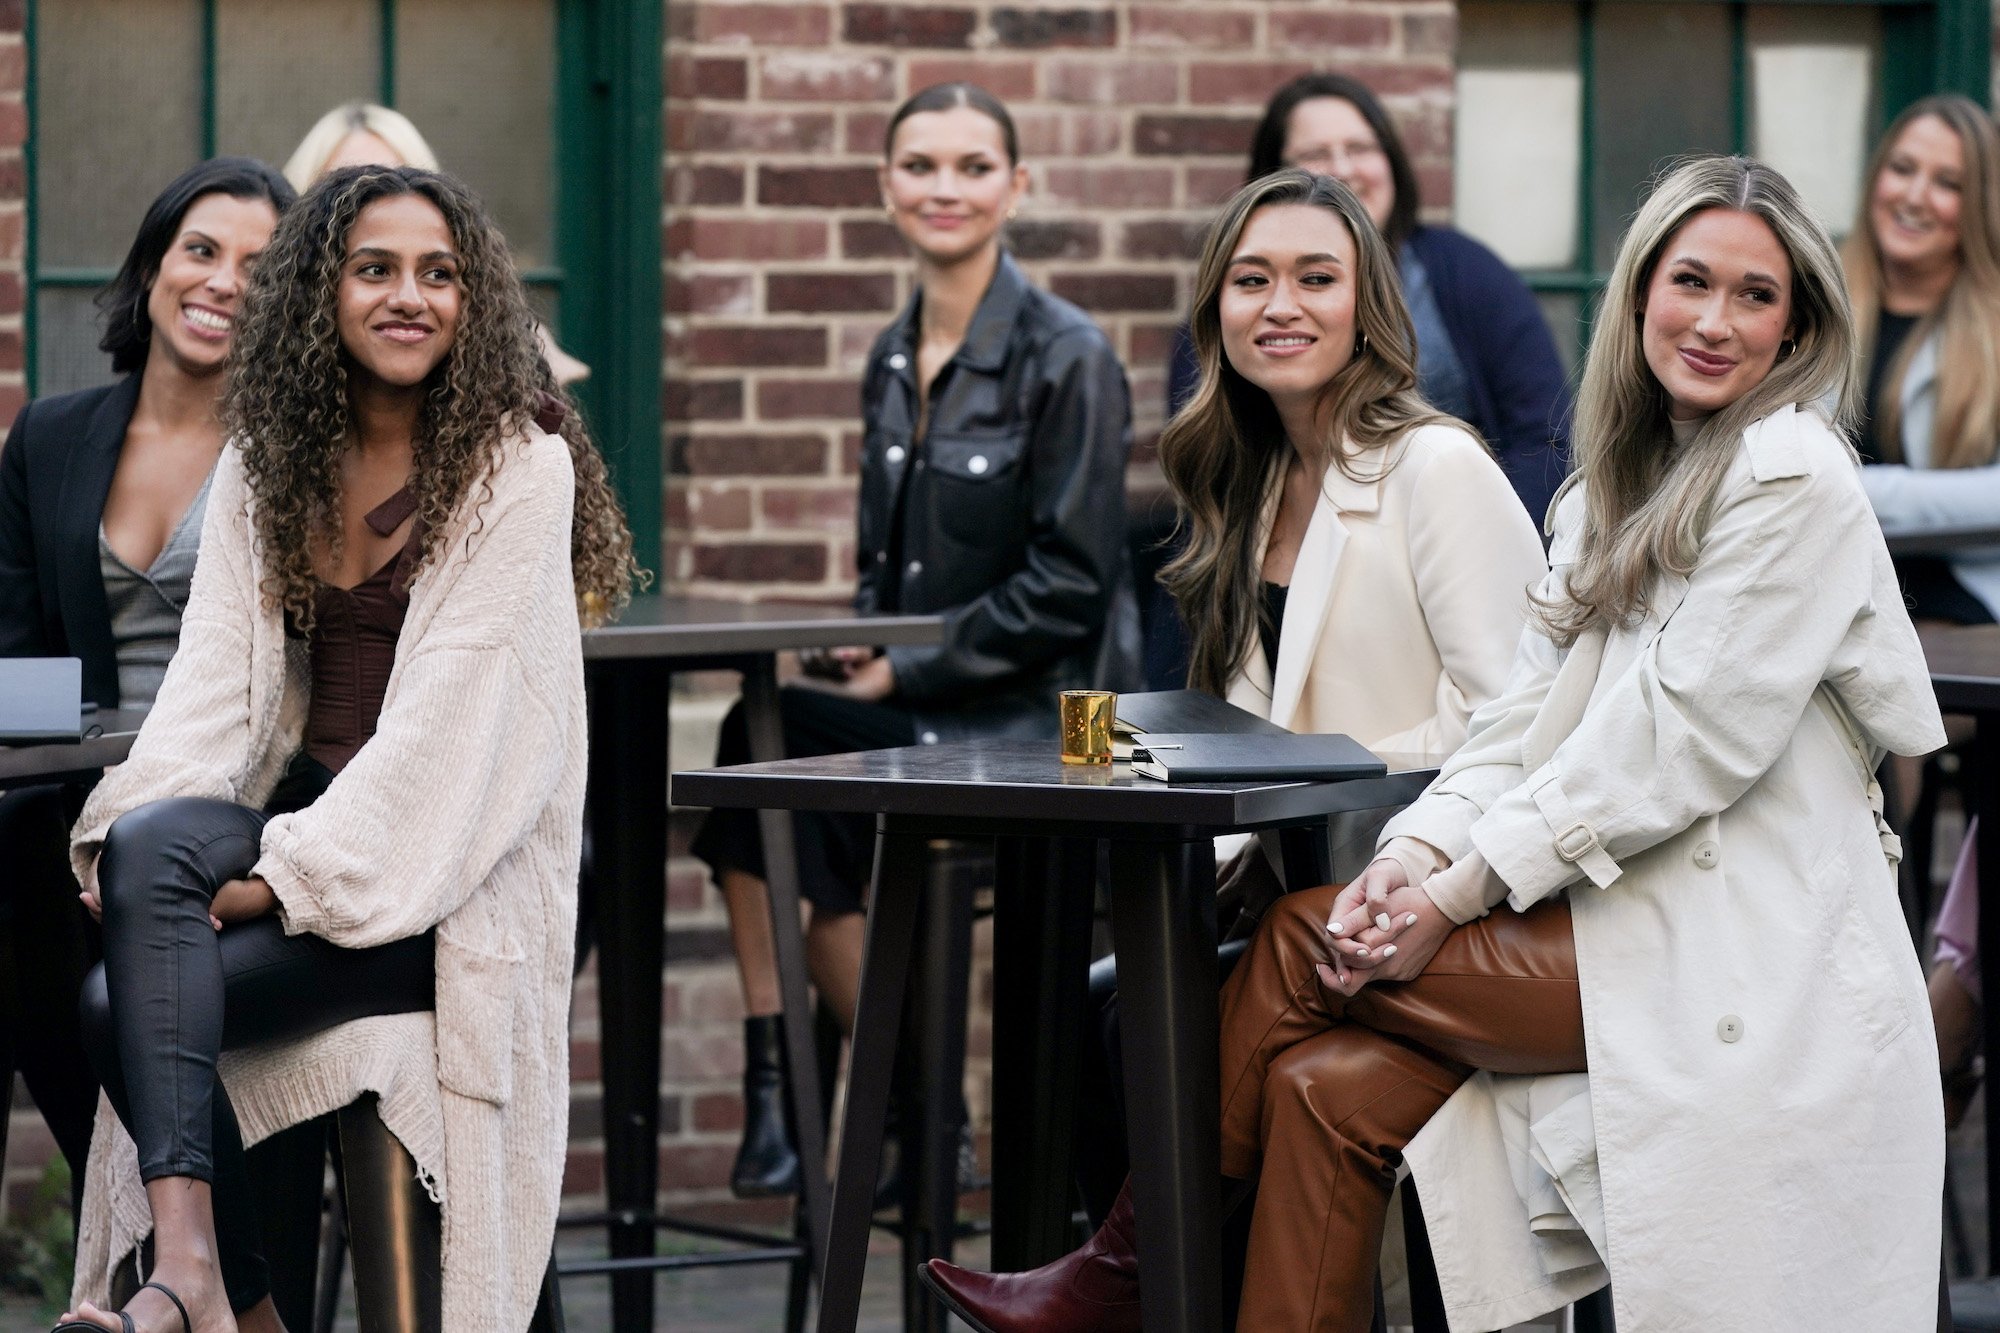 Several women from Clayton Echard's season of 'The Bachelor' sit at tables, including Rachel Recchia who might be a perfect candidate for the next season of 'The Bachelorette.'